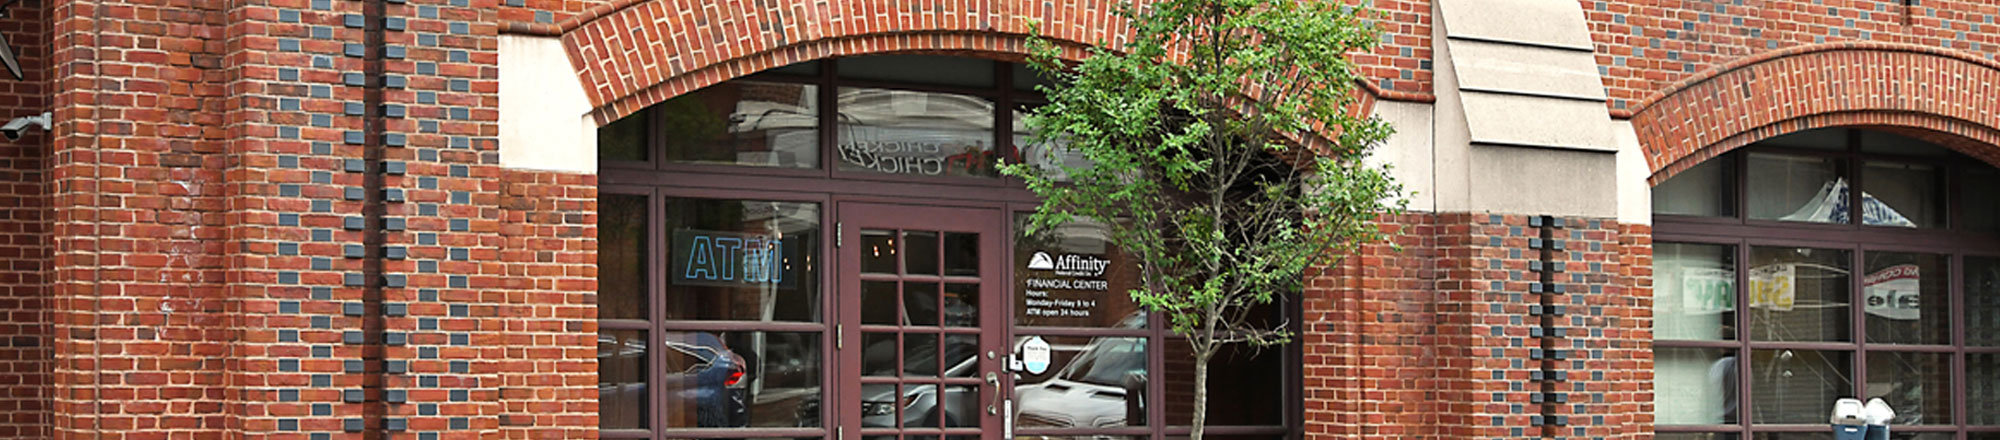 Affinity Branch New Haven, CT